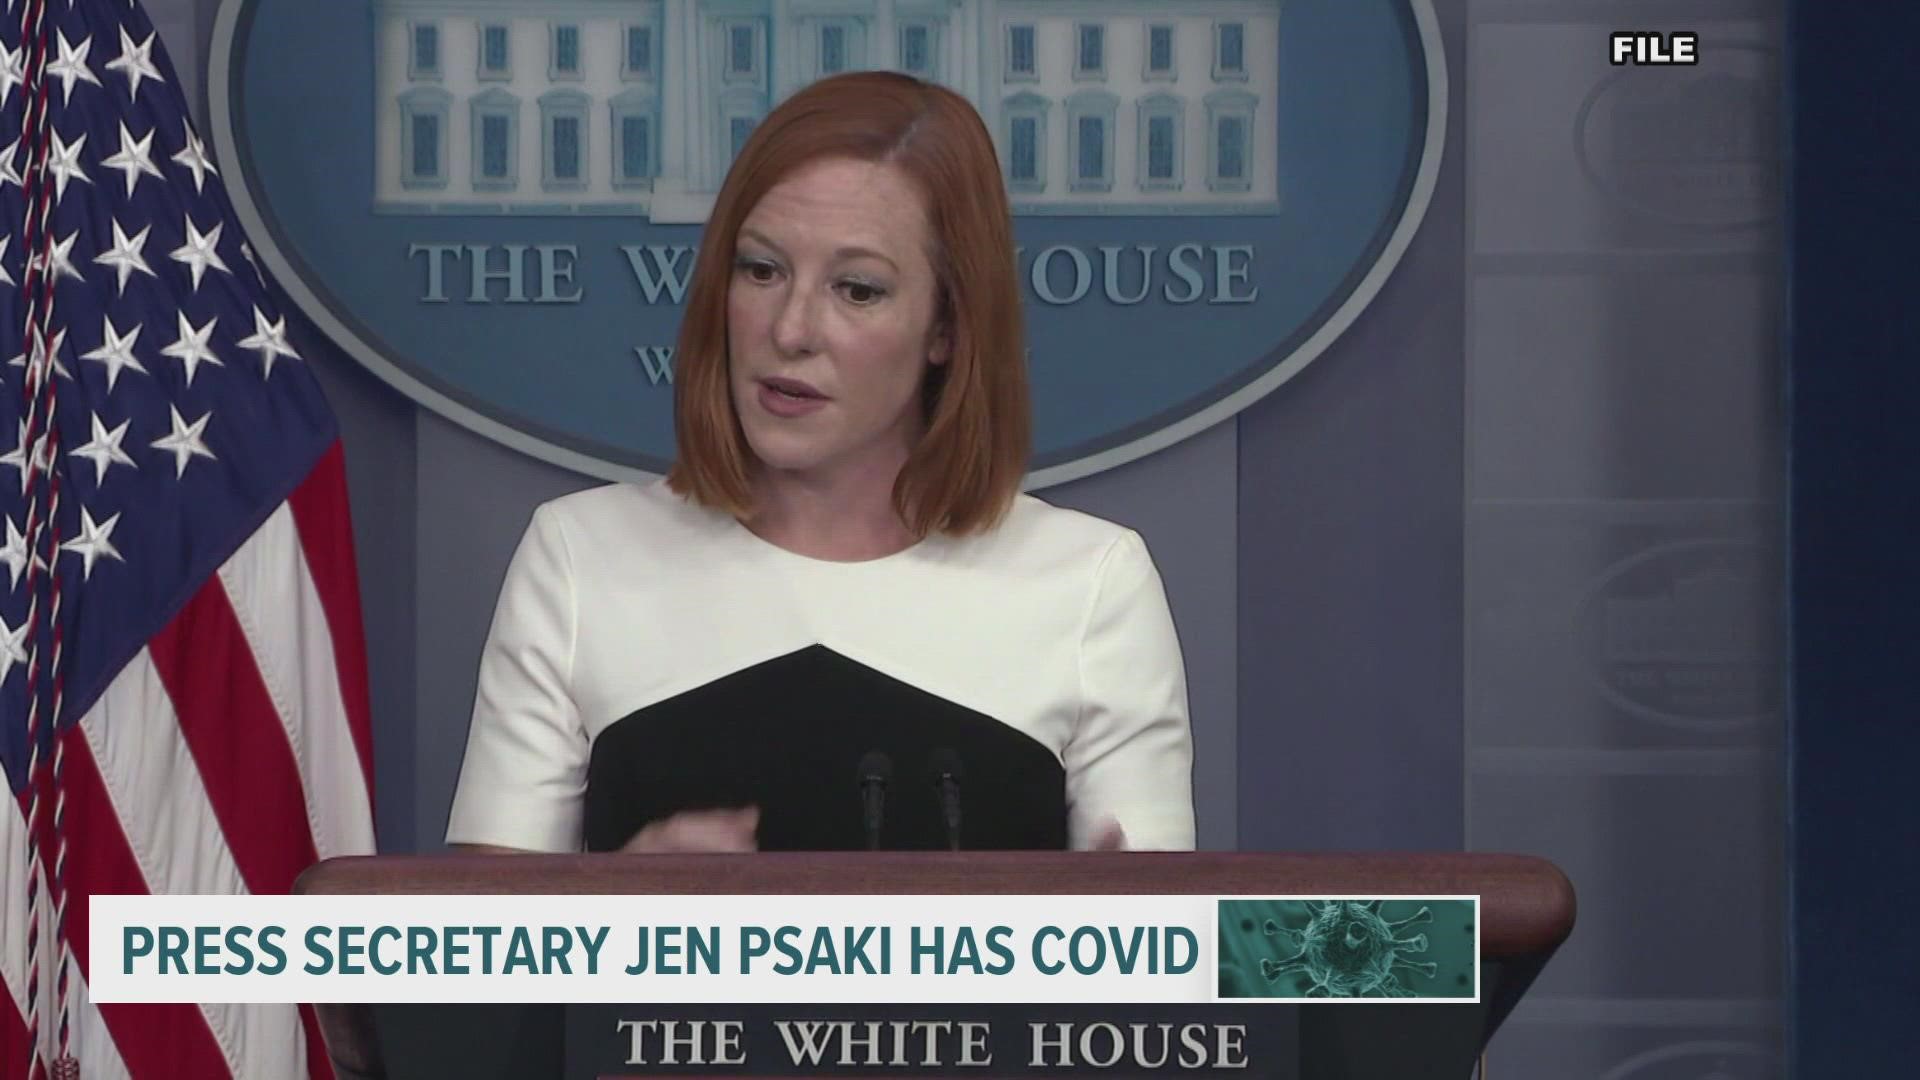 Psaki says she hasn't had close contact with the President or White House staff since Wednesday.